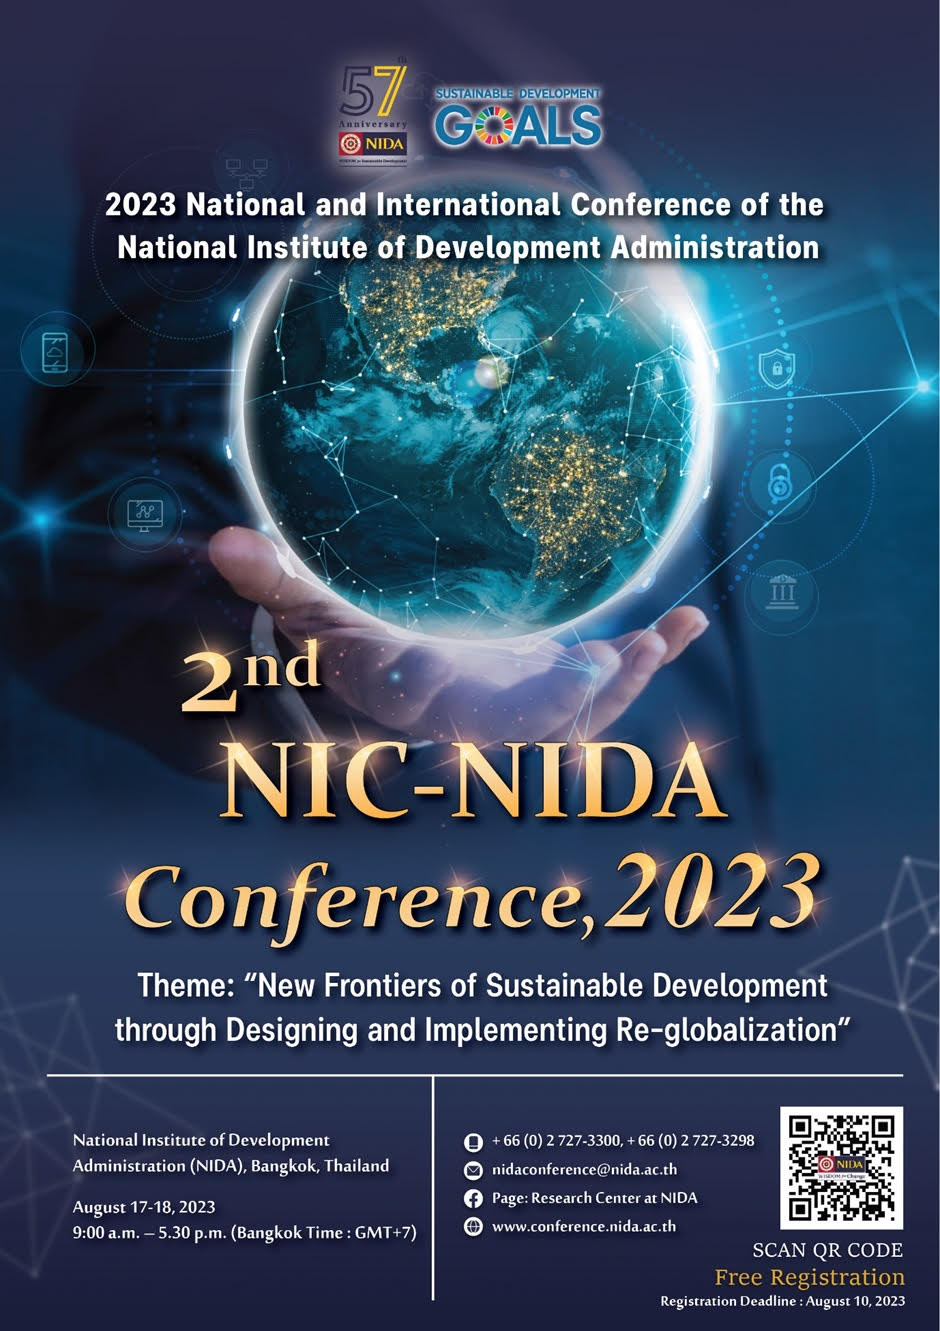 Call for Participations: The 2023 National and International Conference of The National Institute of Development Administration